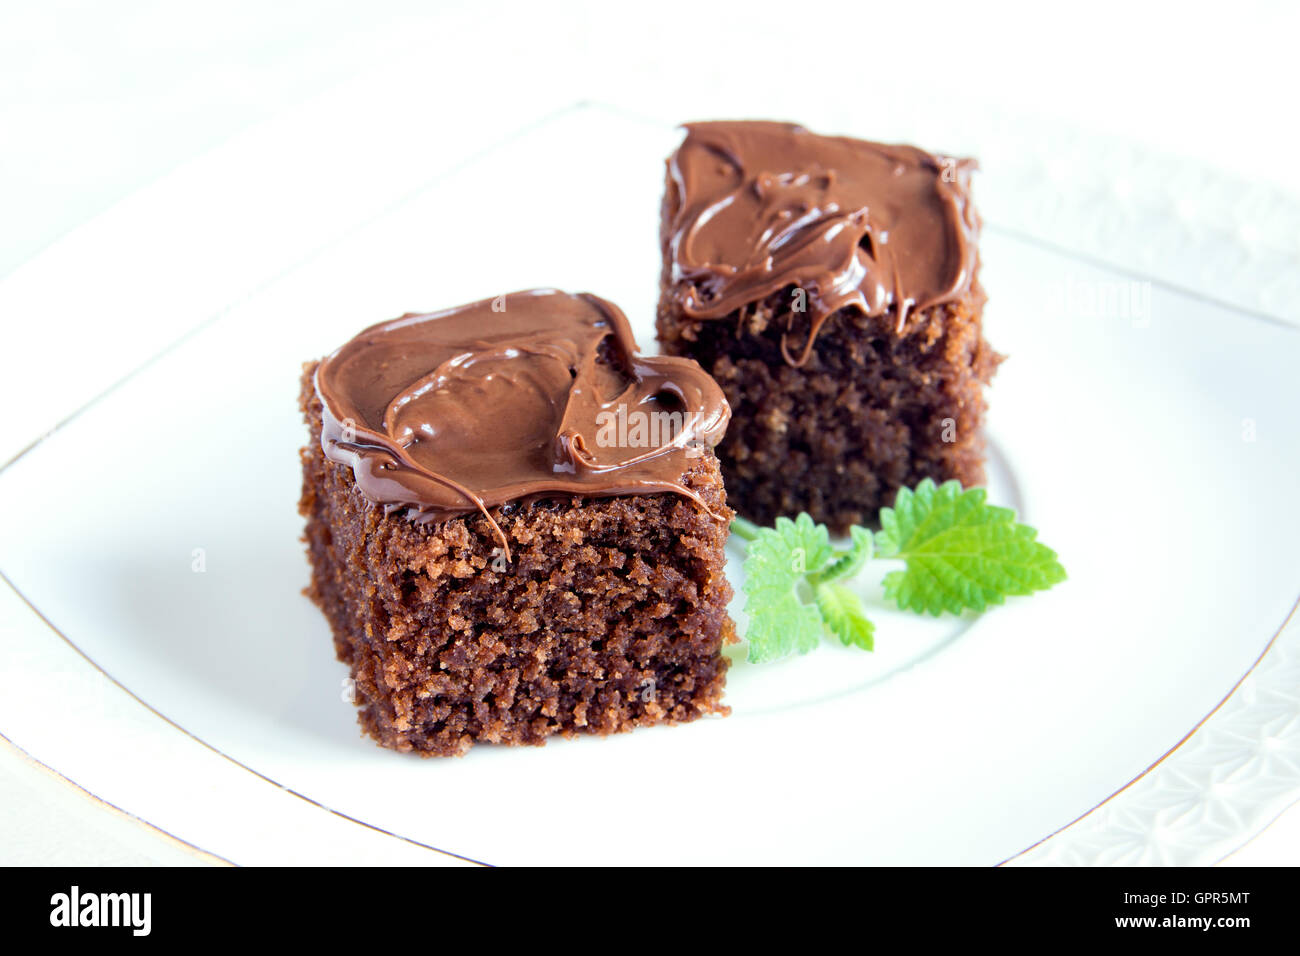 Chocolate mini cakes with chocolate icing and mint on white plate close up Stock Photo